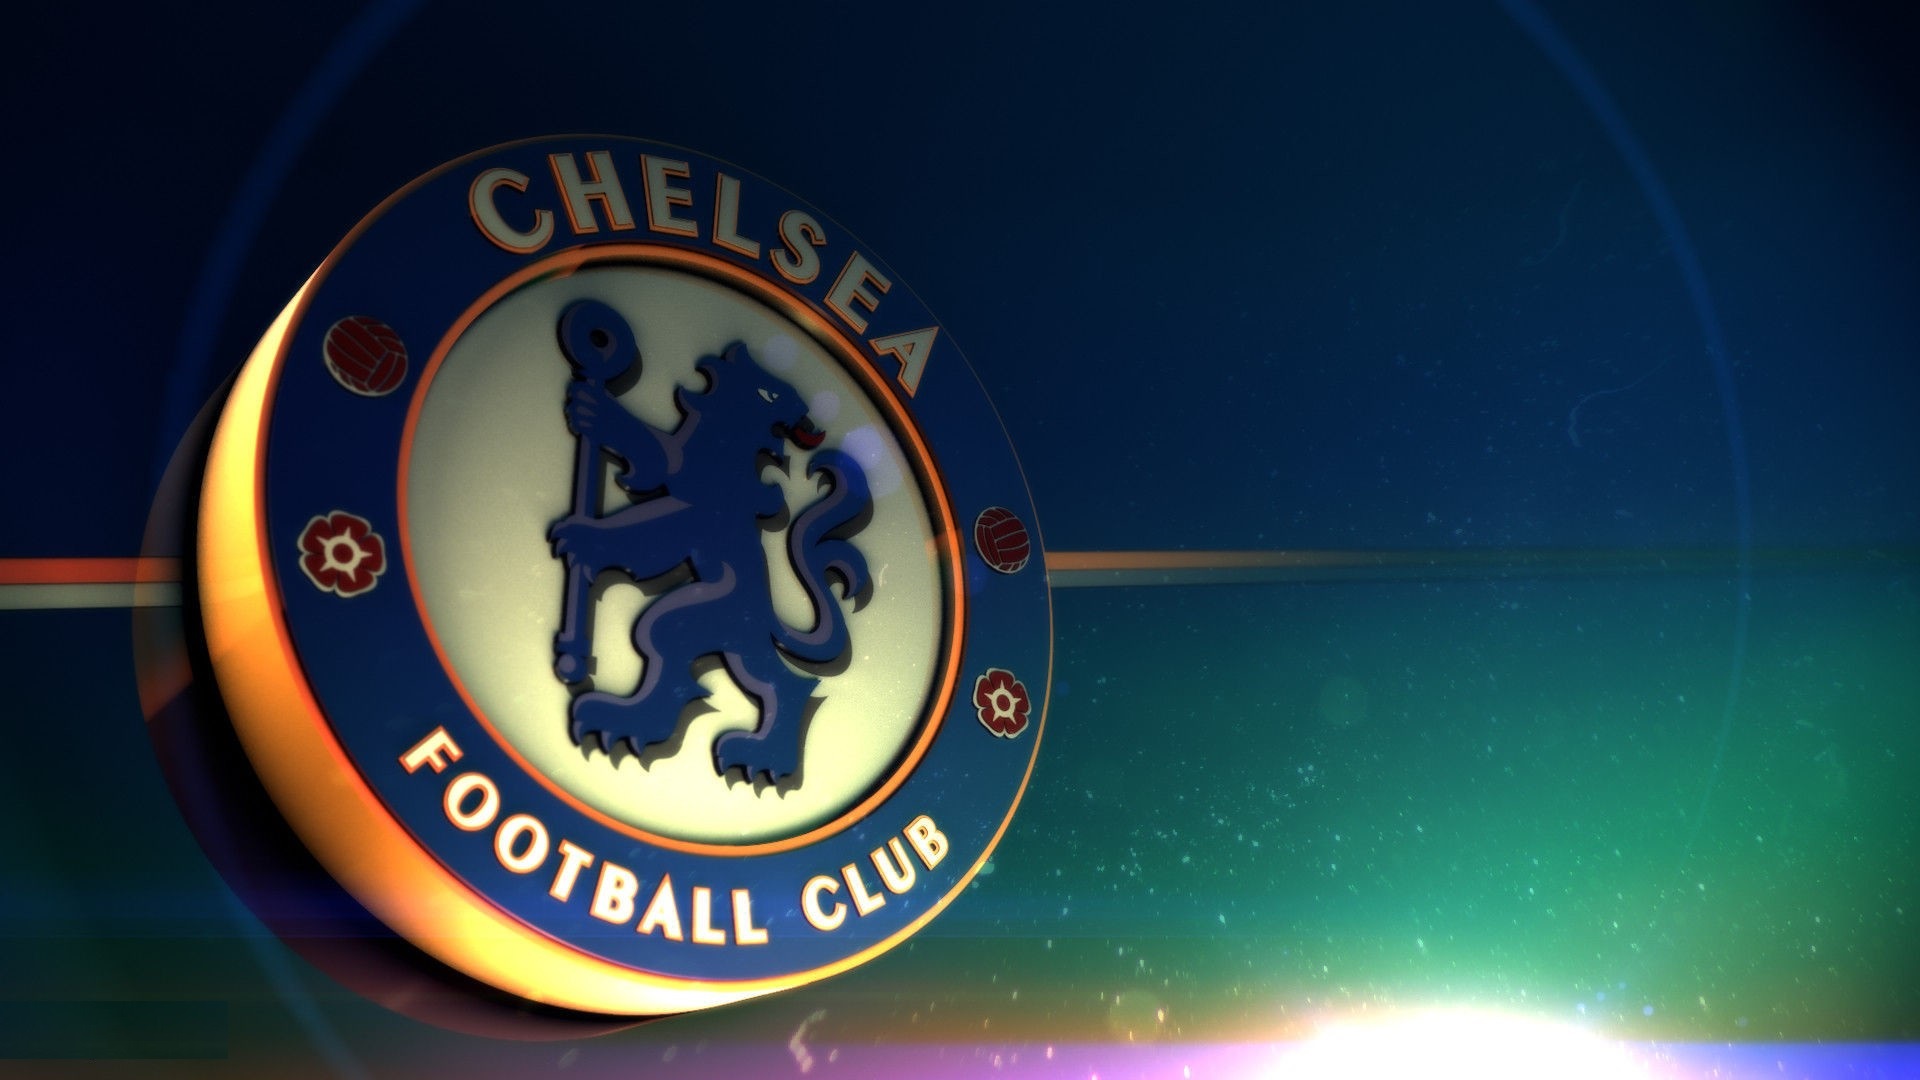 Chelsea Wallpaper For Mac Backgrounds With high-resolution 1920X1080 pixel. You can use this wallpaper for your Desktop Computers, Mac Screensavers, Windows Backgrounds, iPhone Wallpapers, Tablet or Android Lock screen and another Mobile device